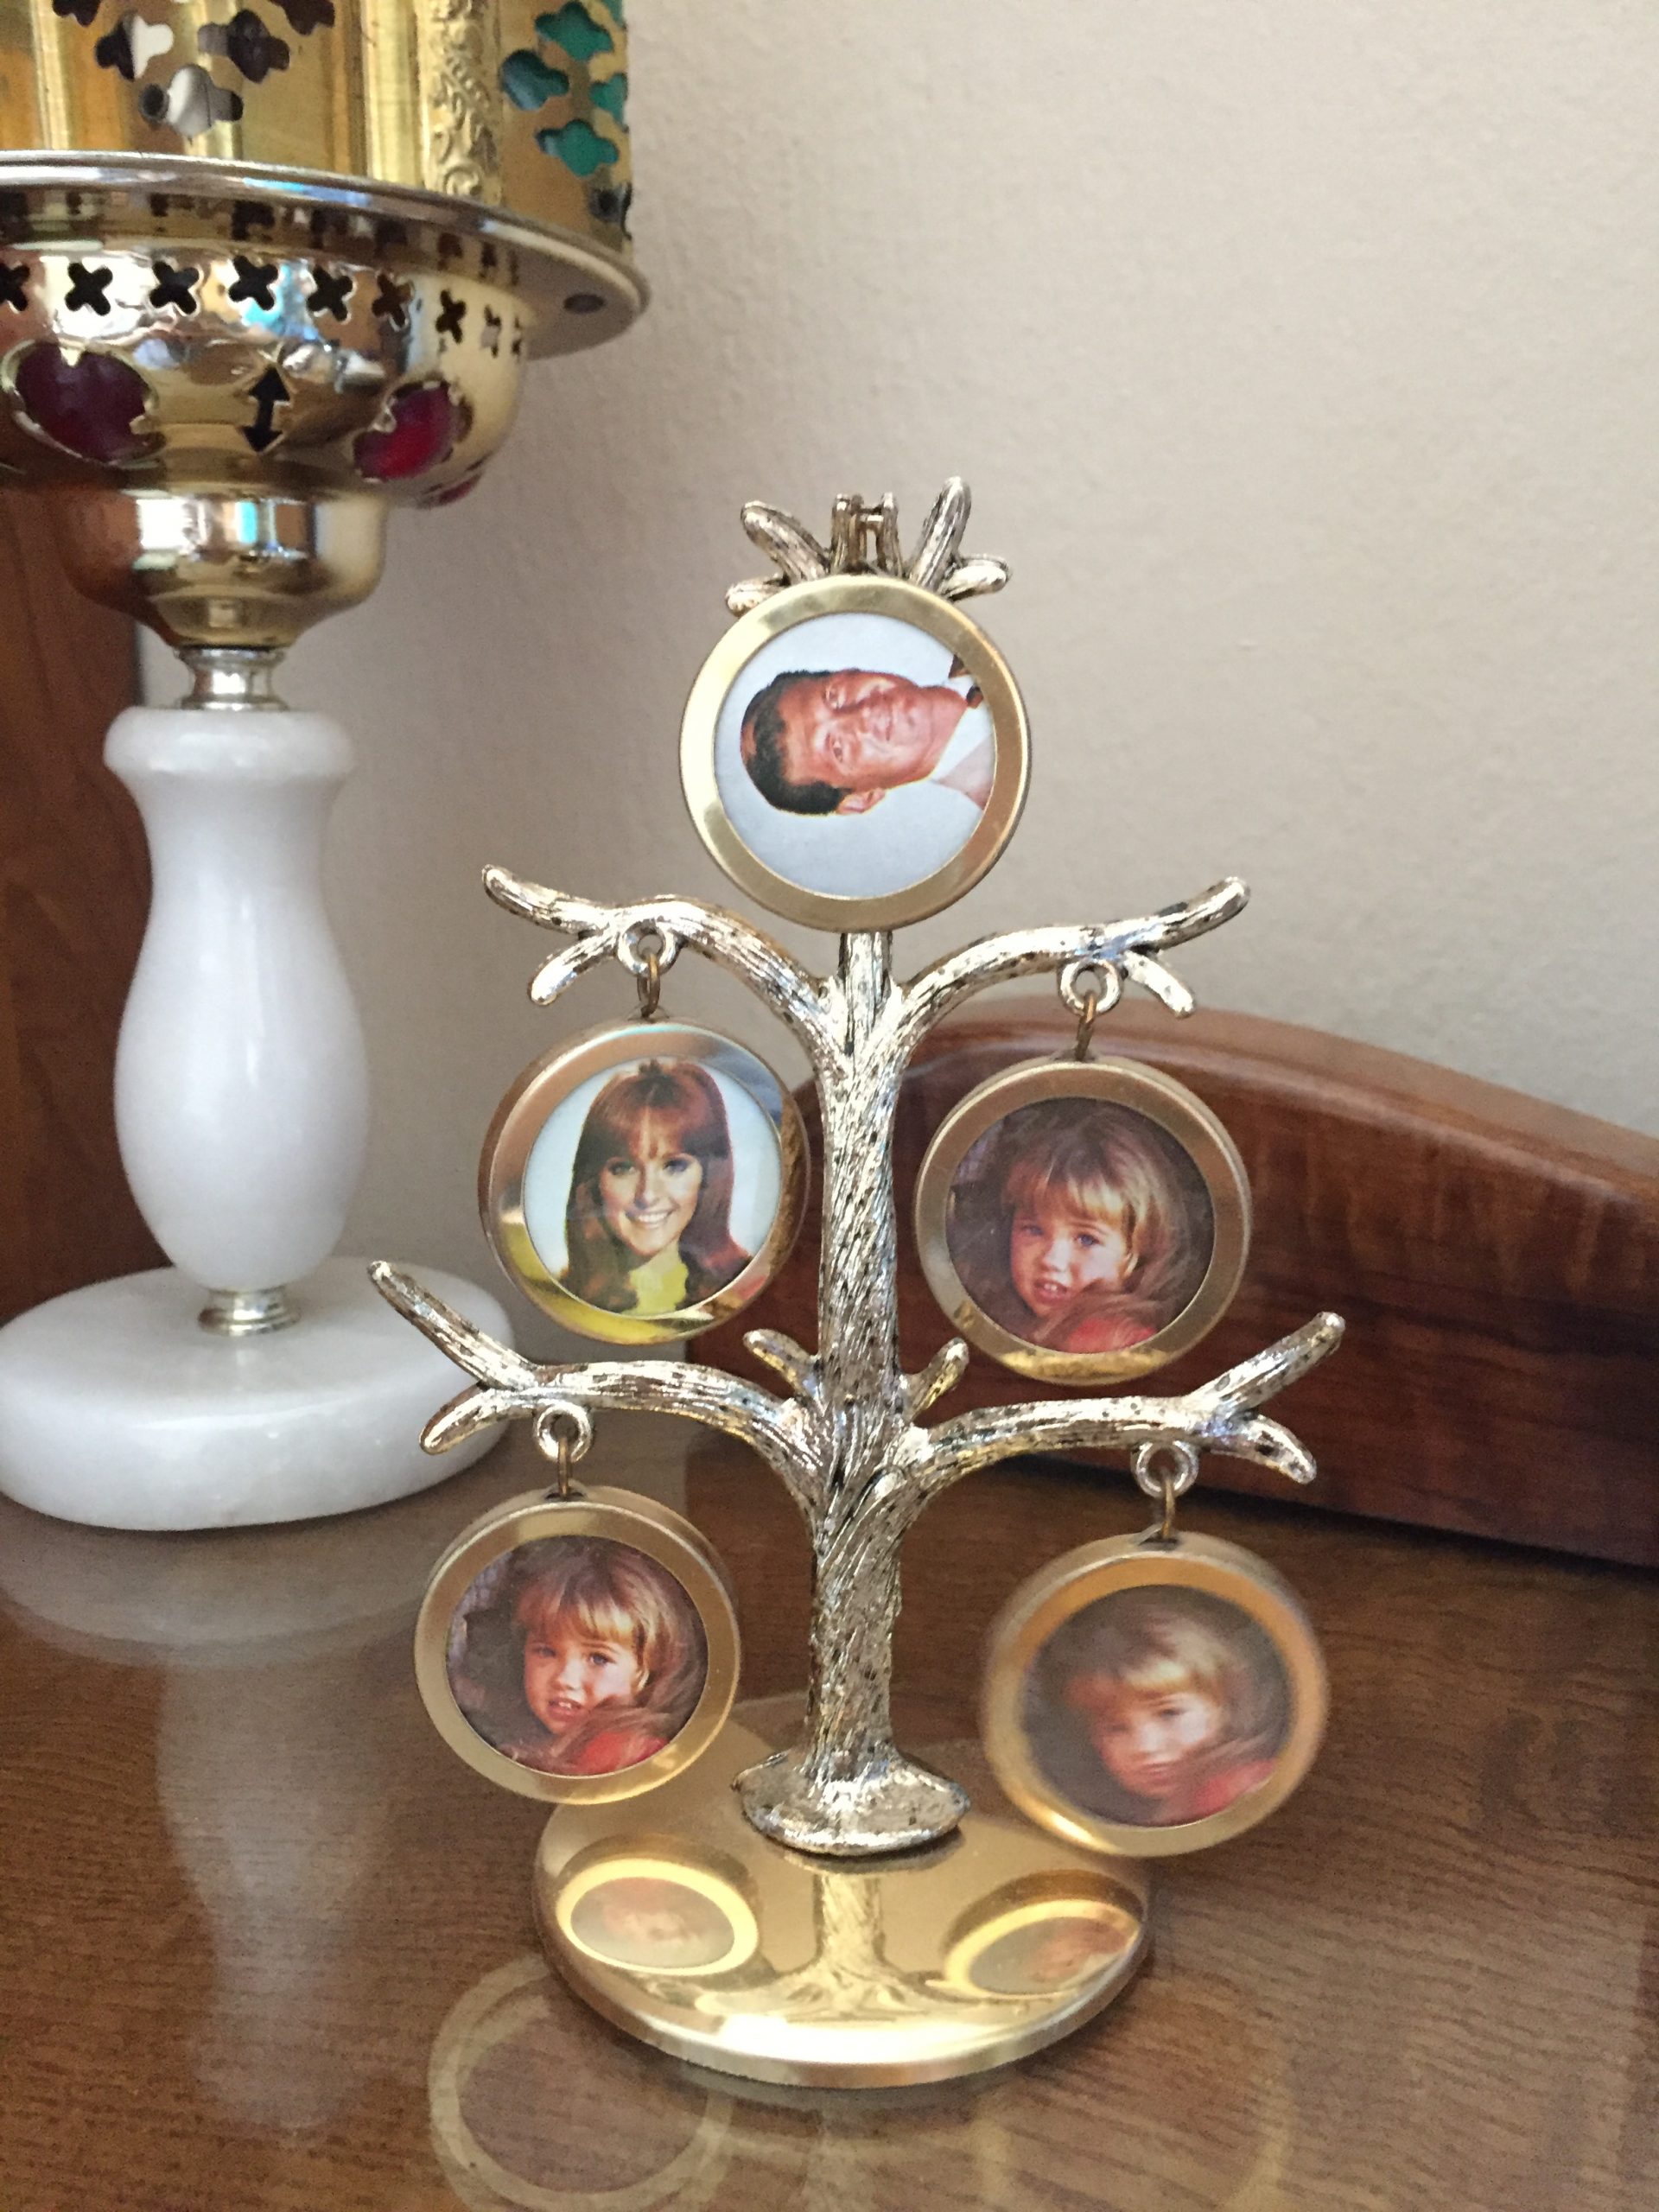 A tree like picture frame, pictures of people hanging on different arms of the tree.